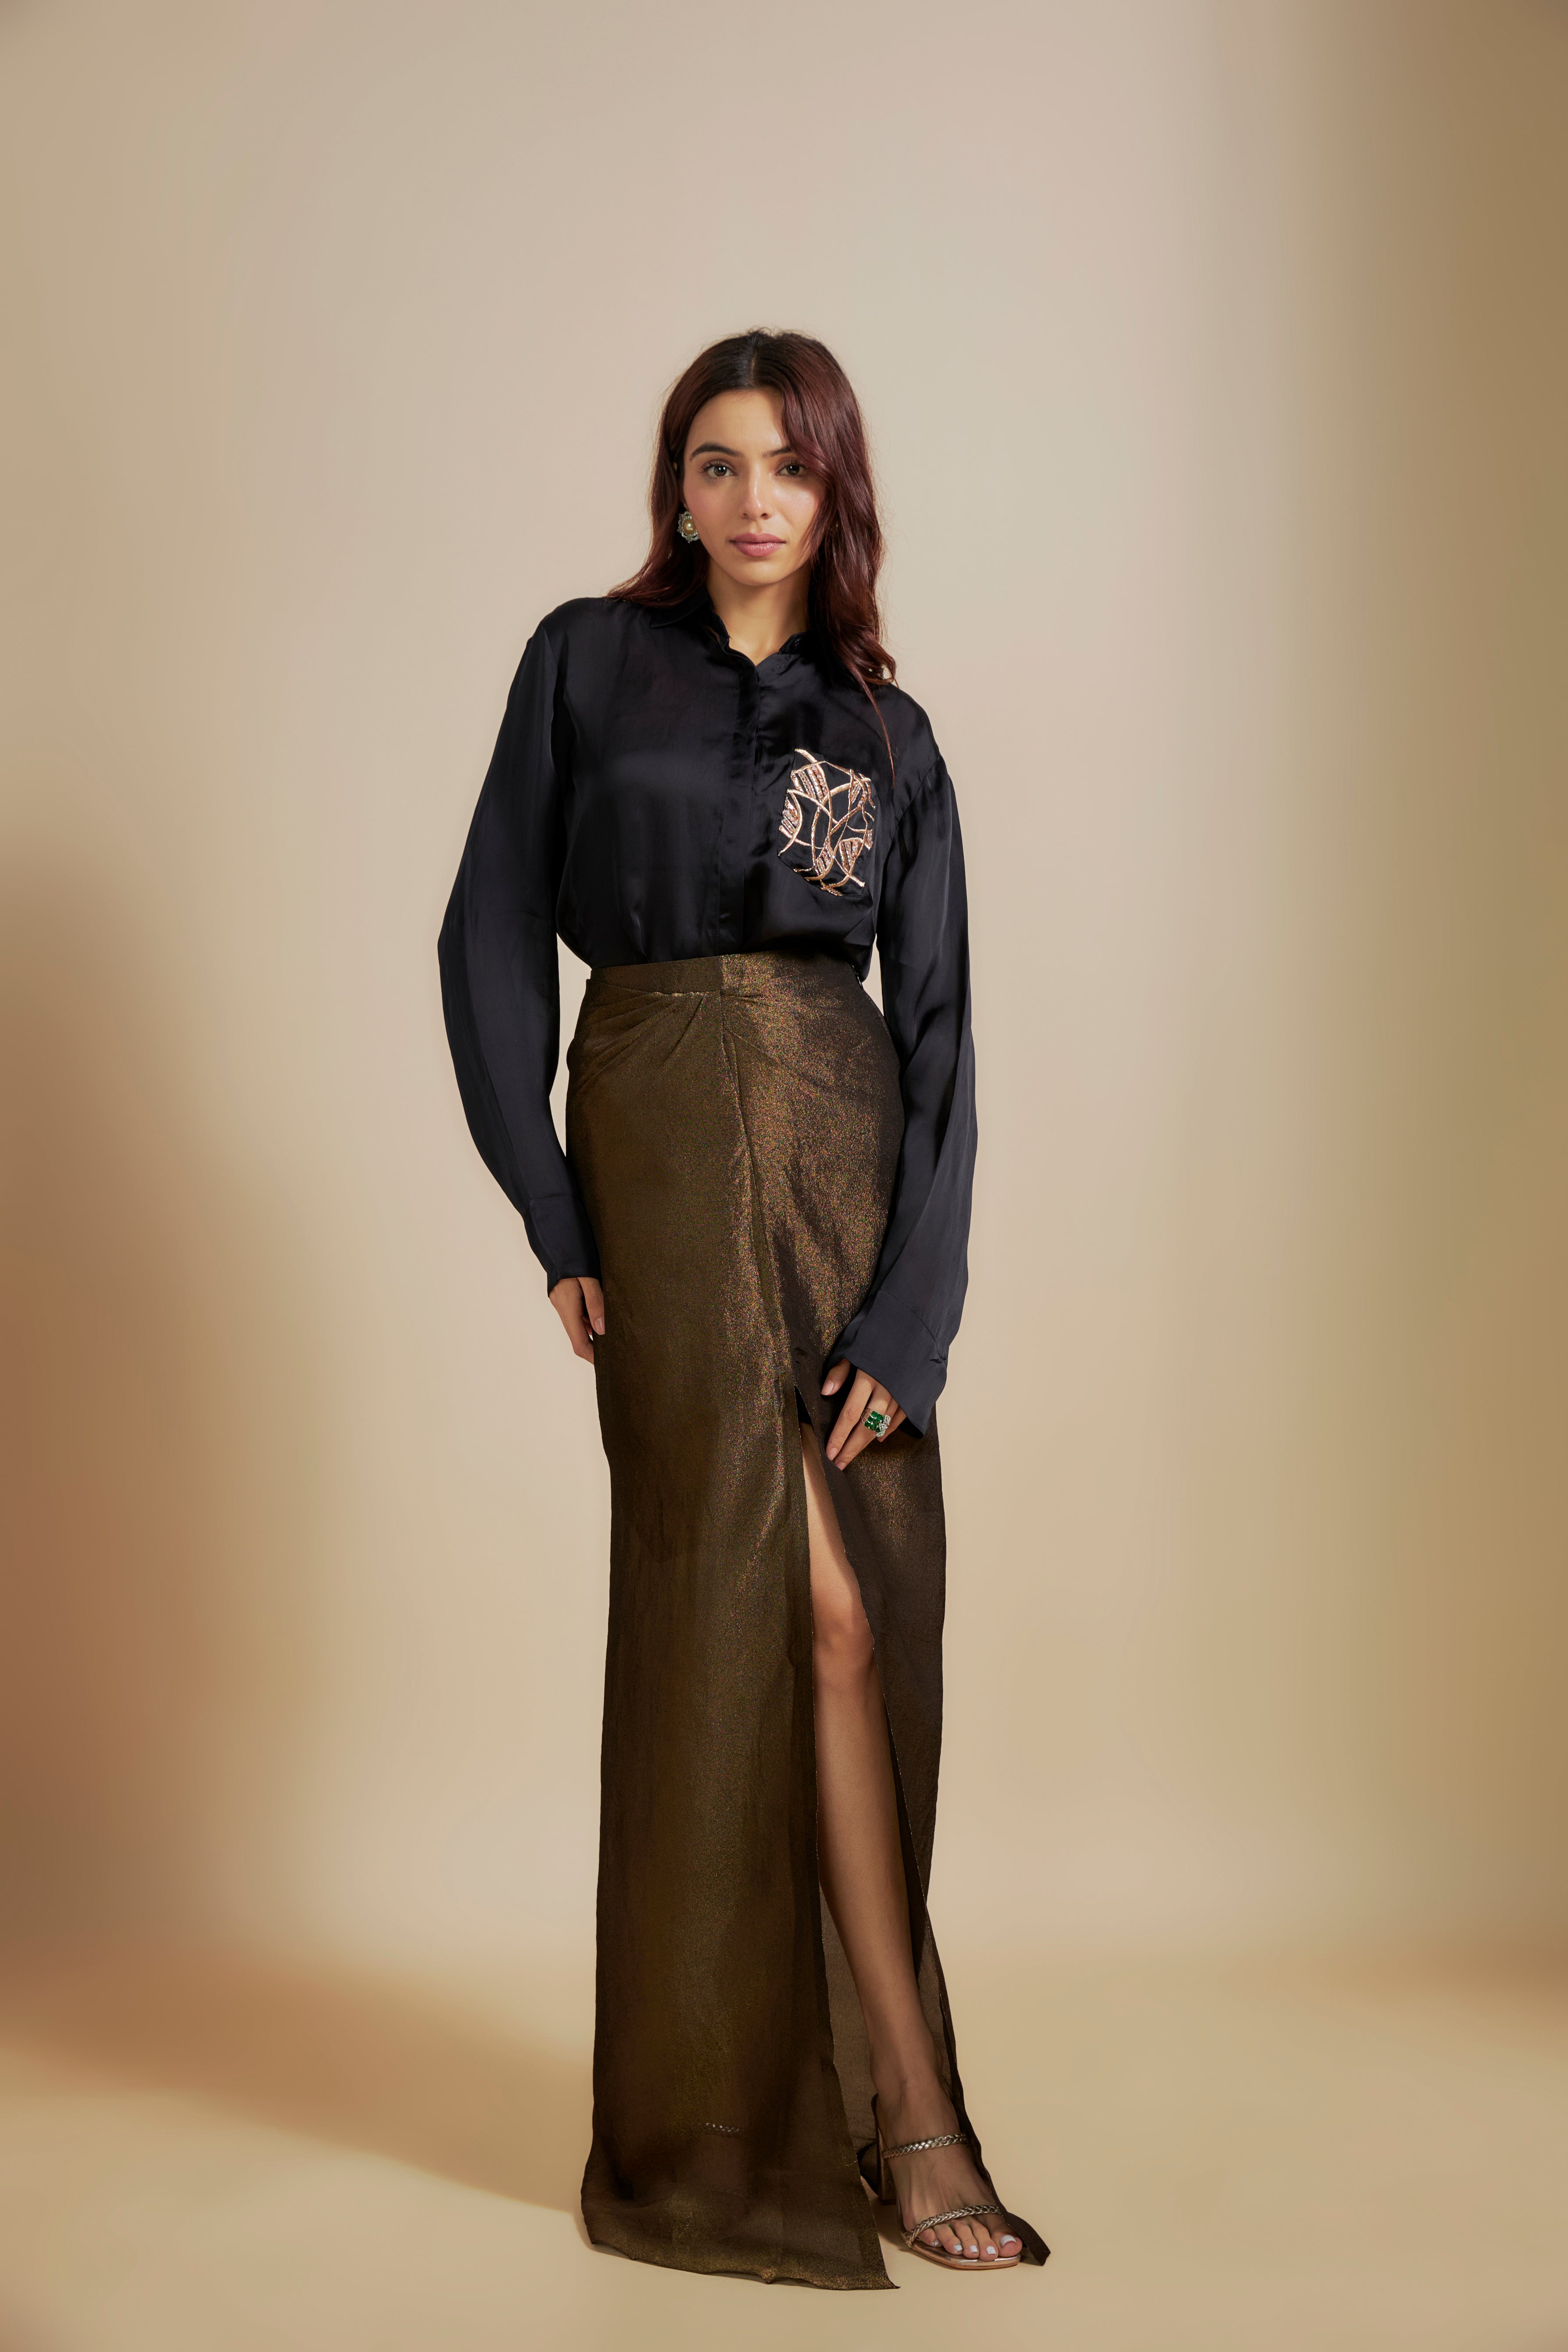 Black Embroidered Shirt With Black Skirt